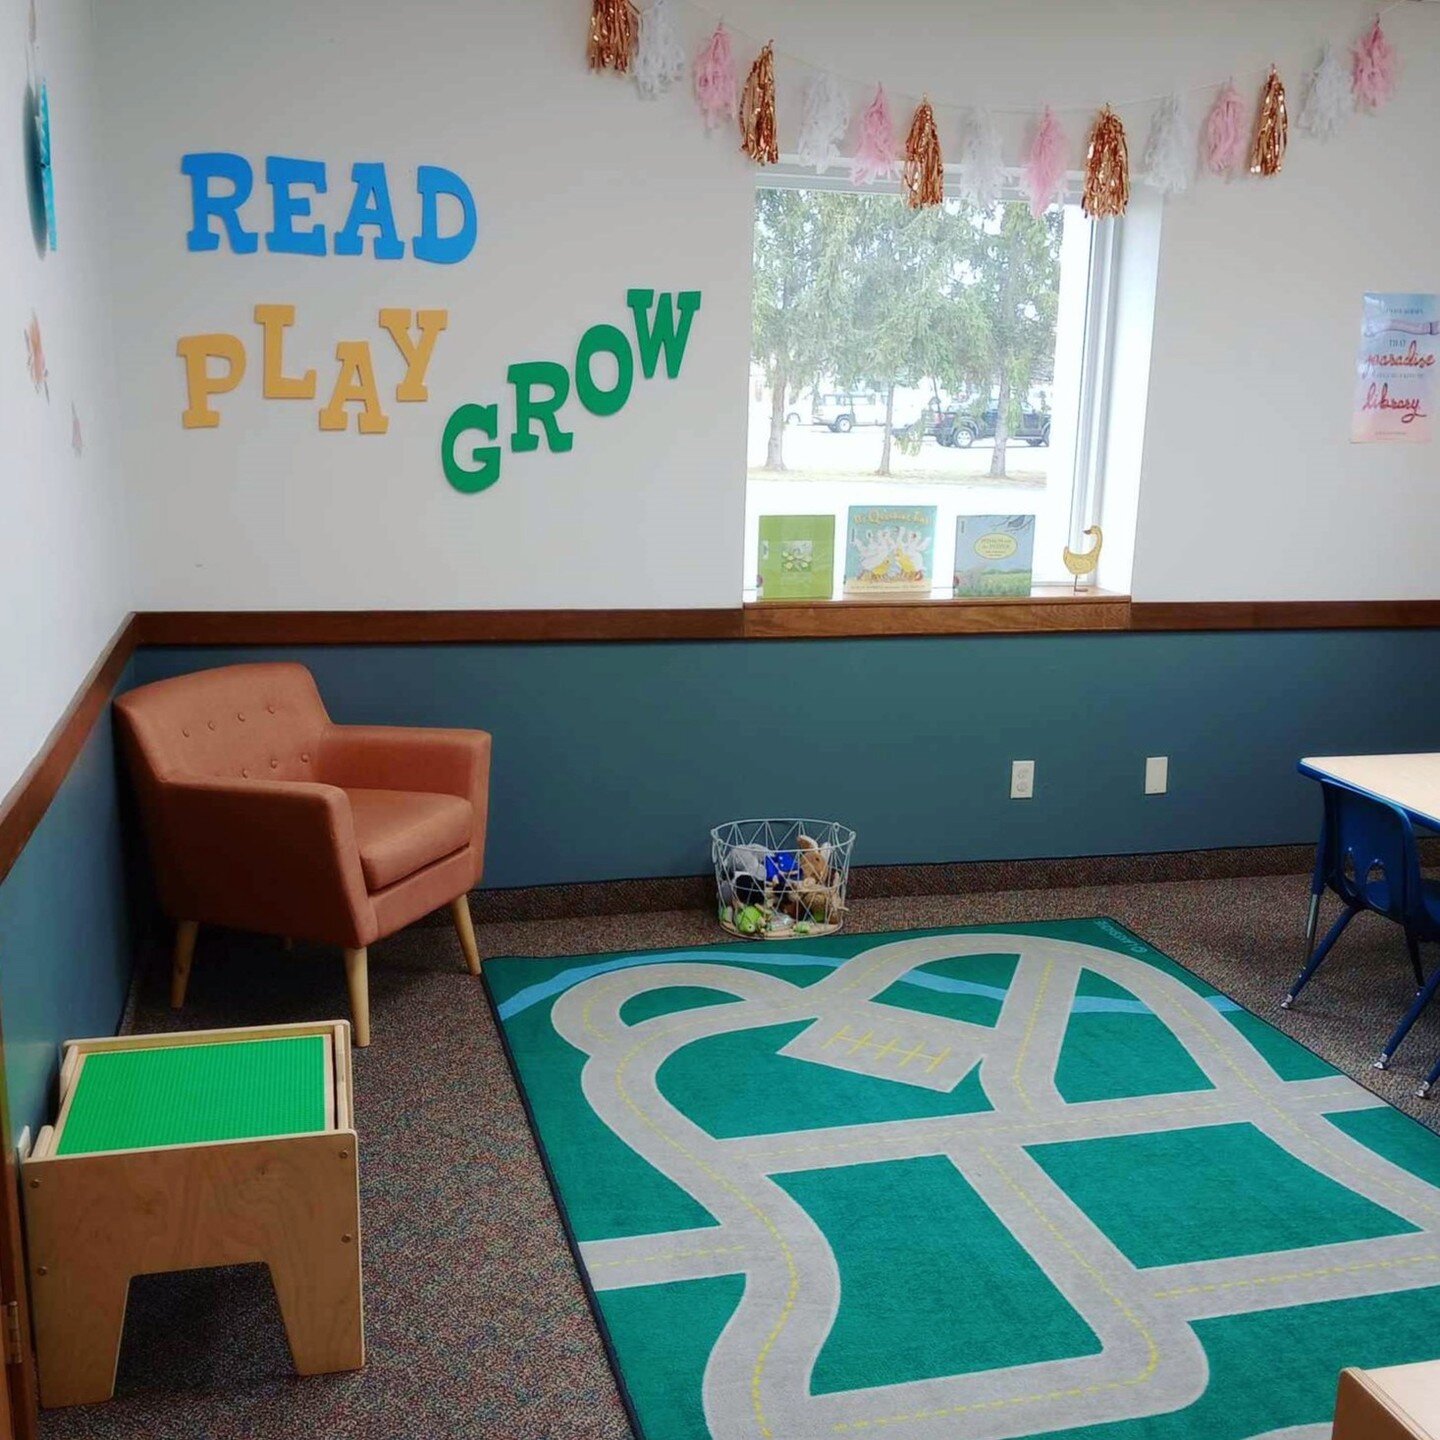 Have you stopped by the classroom lately? Check out the new toys, books and coloring sheets on your next visit to the library! 🐇🌷🐣

#kidsclassroom #childrensclassroom #springclassroom #toyrotation #library #libraries #childrenslibrary #read #readi